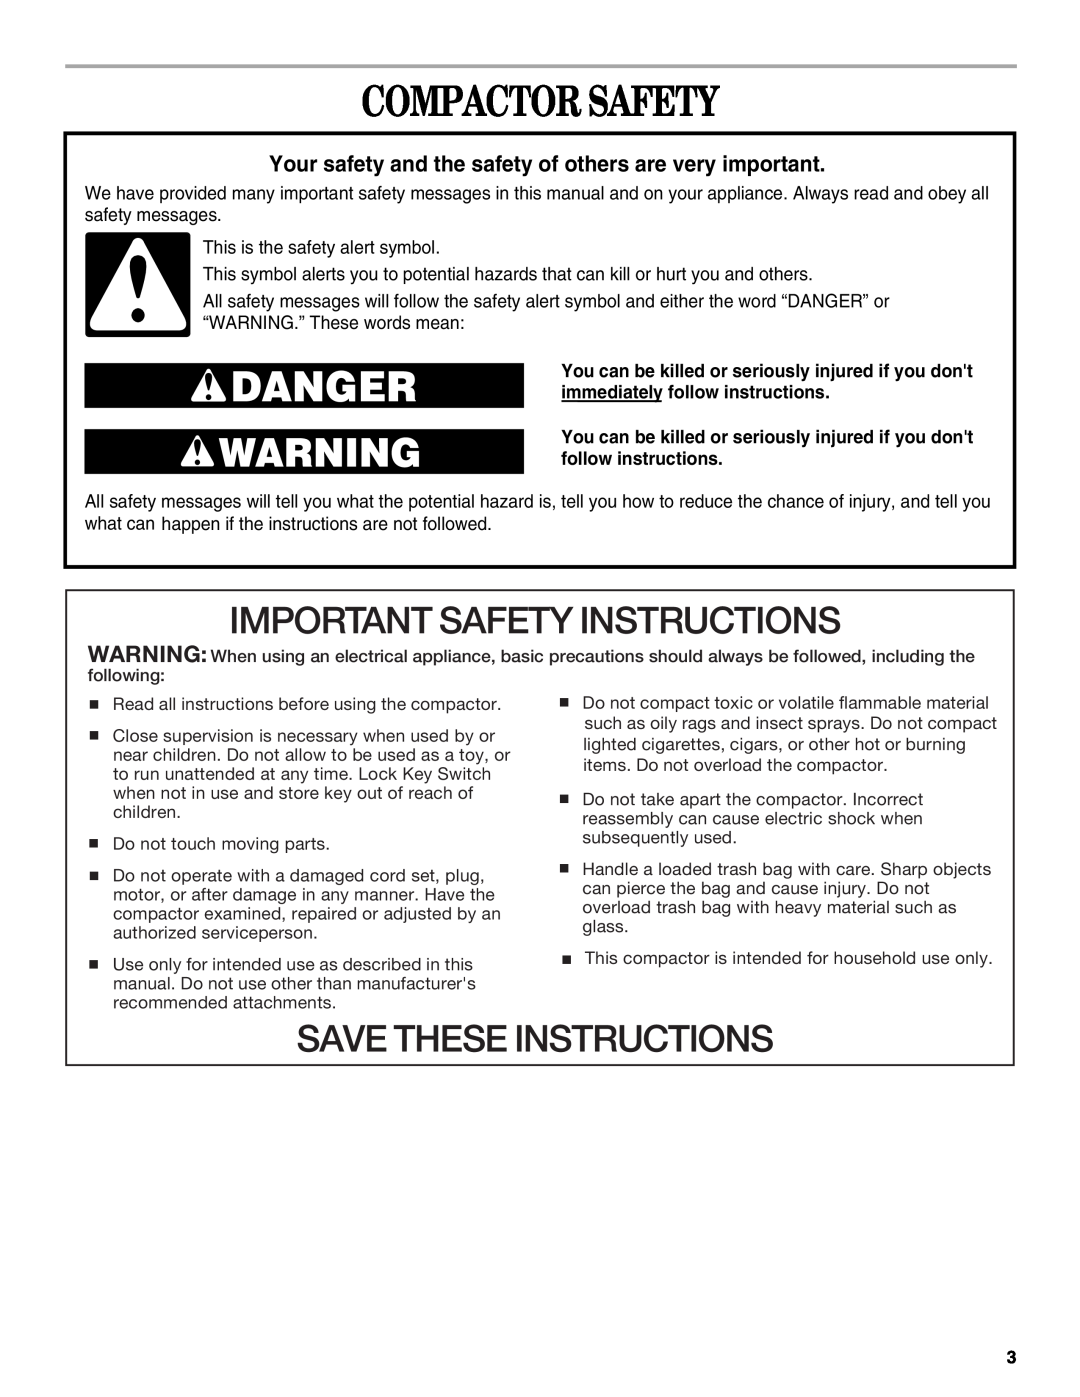 Whirlpool manual Compactor Safety, Important Safety Instructions, Save These Instructions 